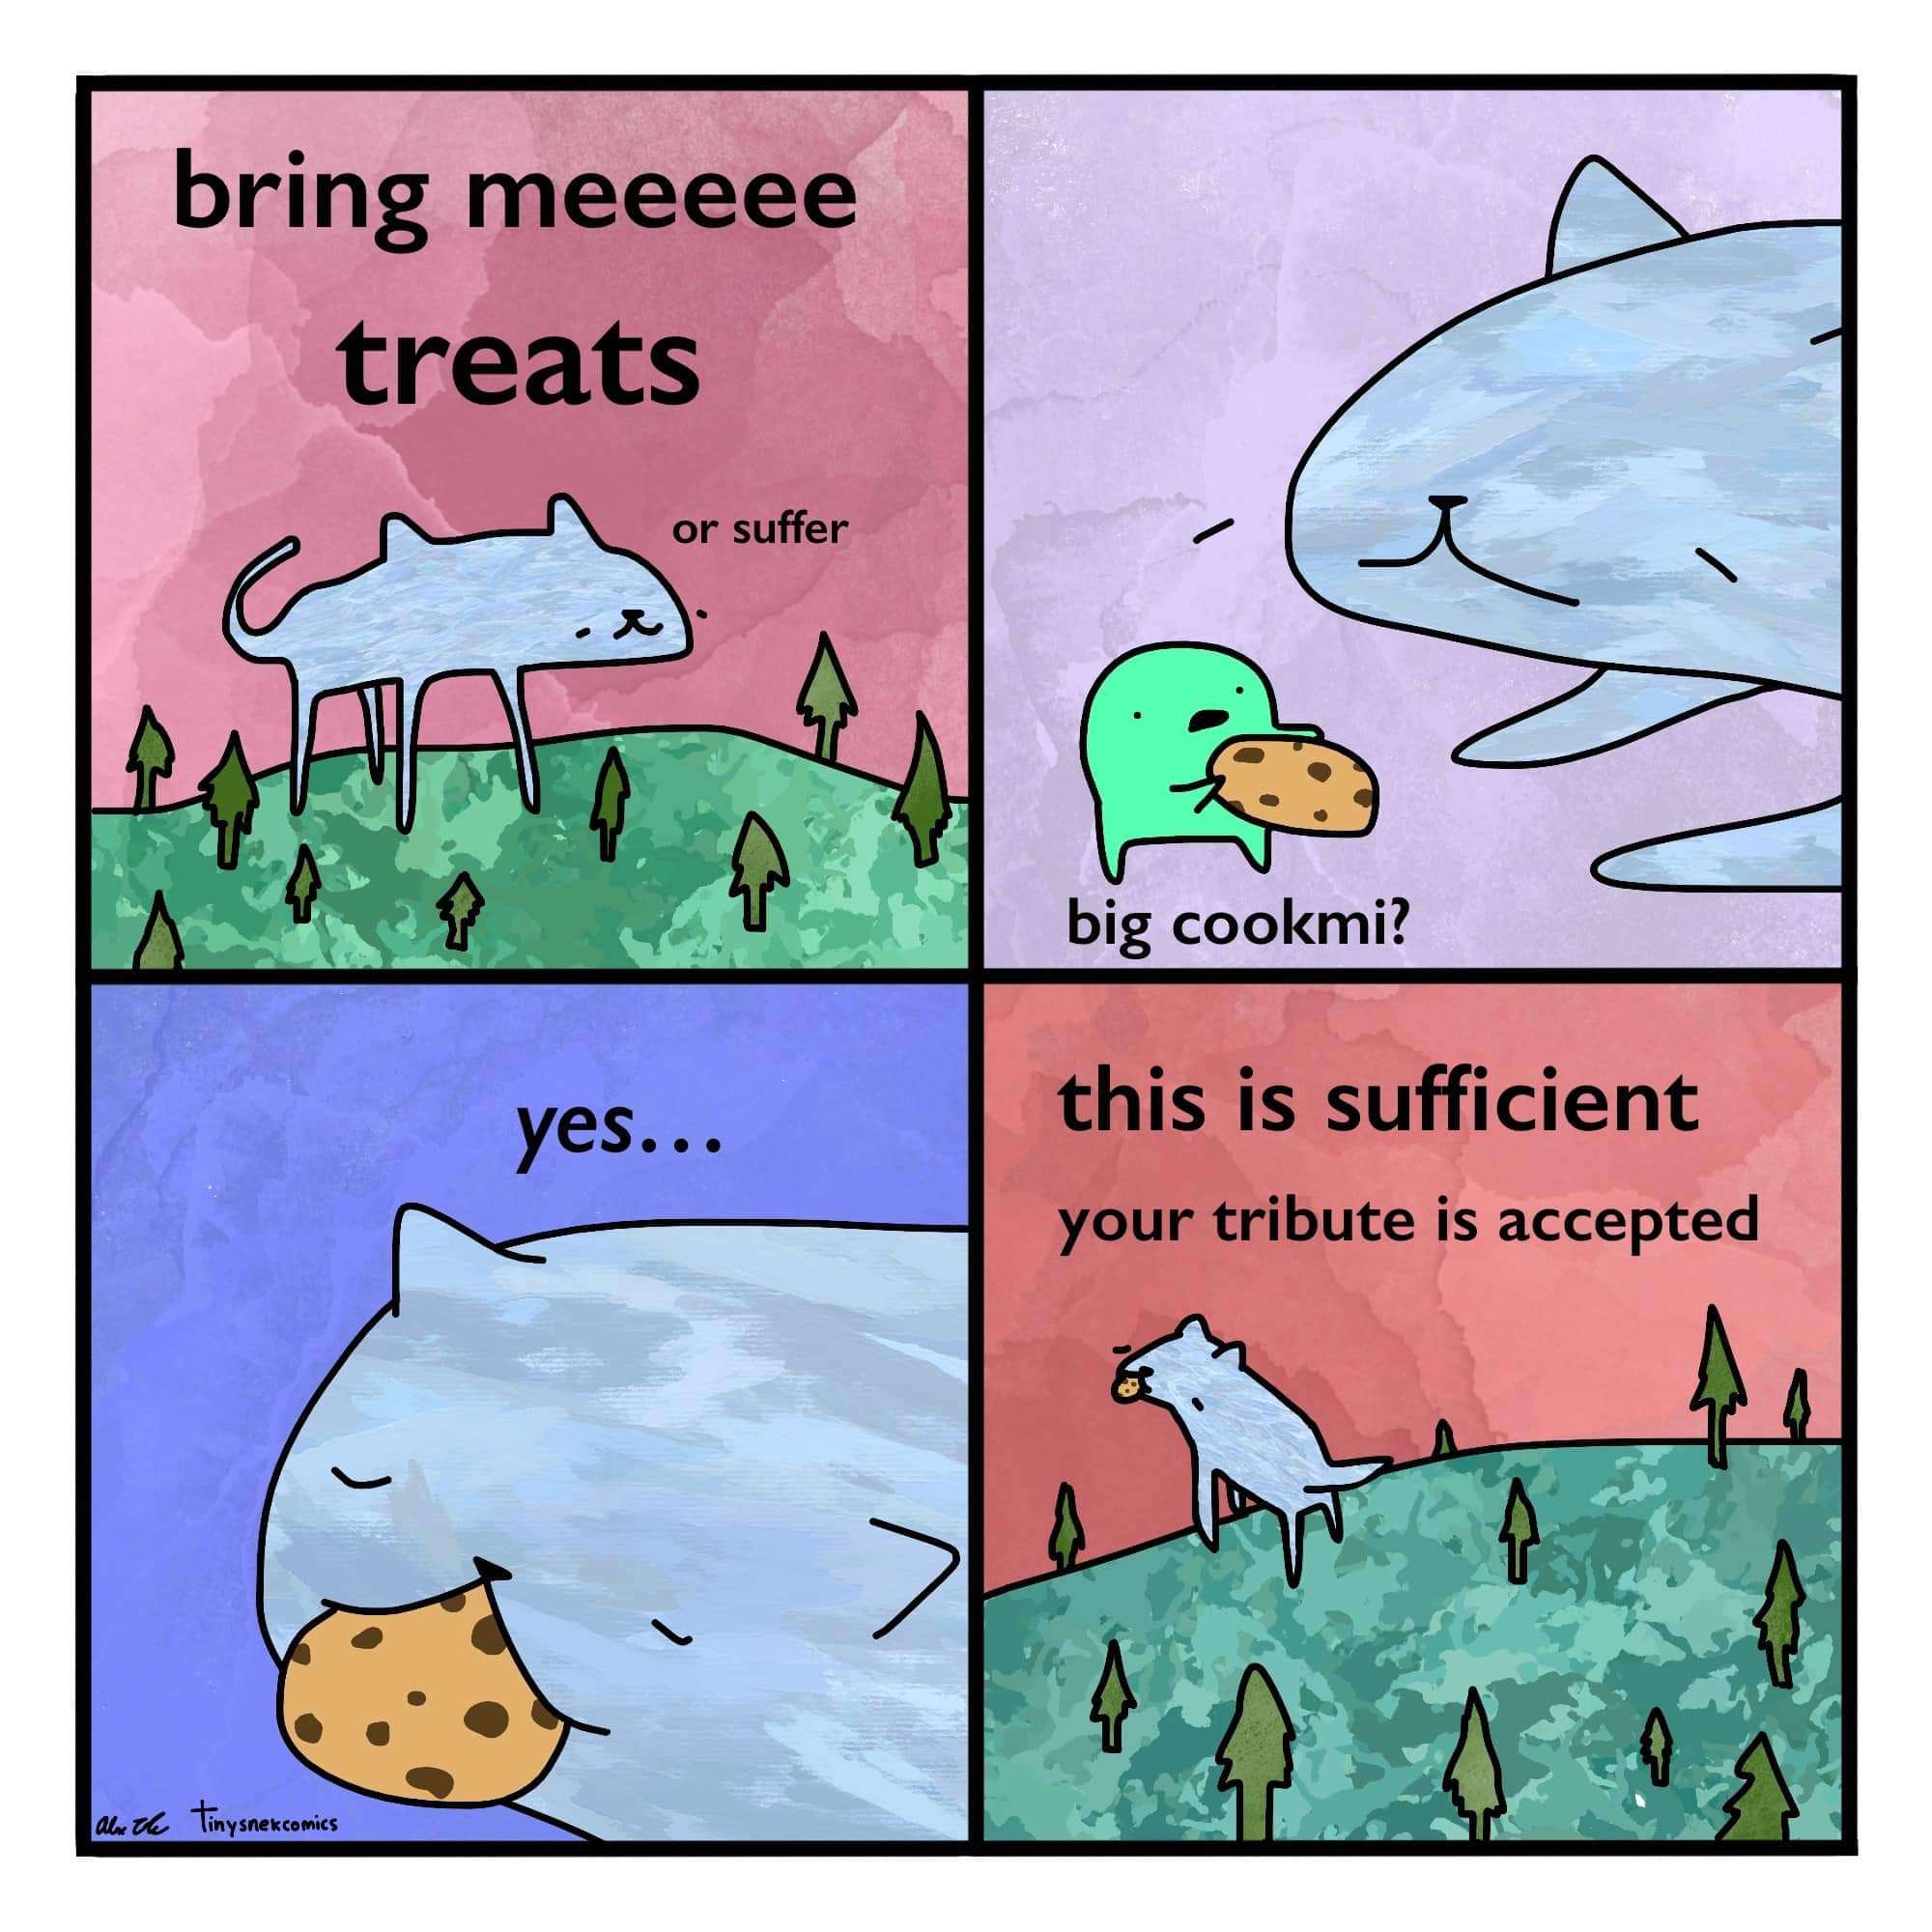 a four panel comic. first panel: a shittily drawn enormous grey cat stands in a forest towering over the trees saying 'bring meeee treats. or suffer.' second panel: the cat is lying down in front of a little green guy saying 'big cookmi?' and offering the cat a giant cookie. third panel: the cat has the cookie in its mouth saying 'yes....' forth panel: the cat is walking back over the forest, looking over its shoulder with the cookie in its mouth saying, 'this is sufficient. your tribute is accepted.'